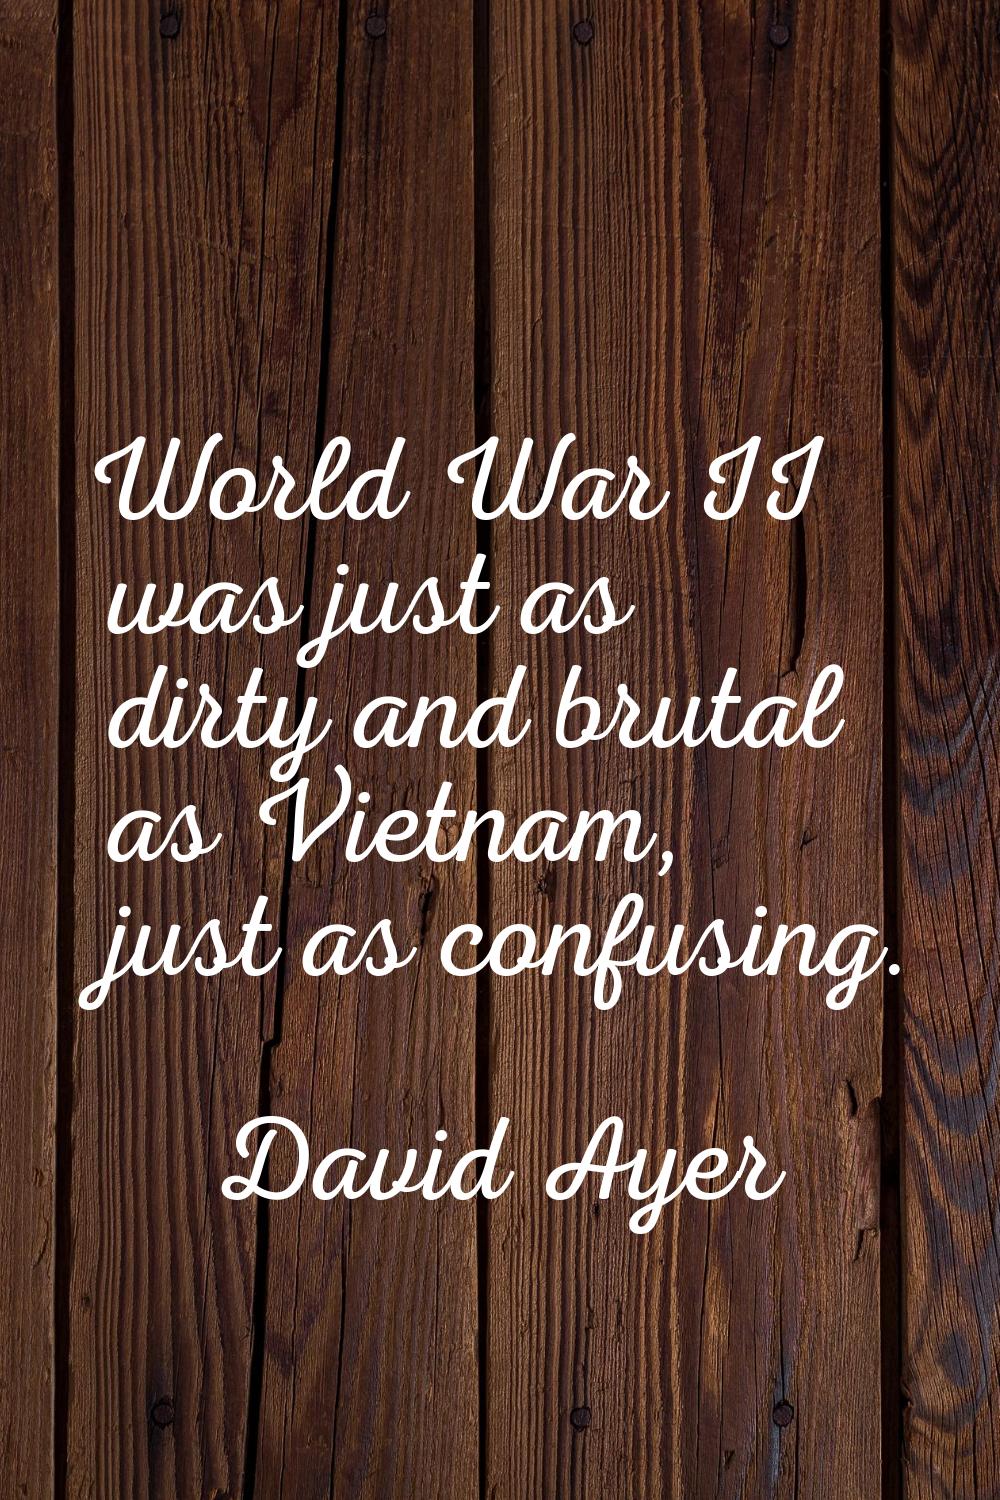 World War II was just as dirty and brutal as Vietnam, just as confusing.